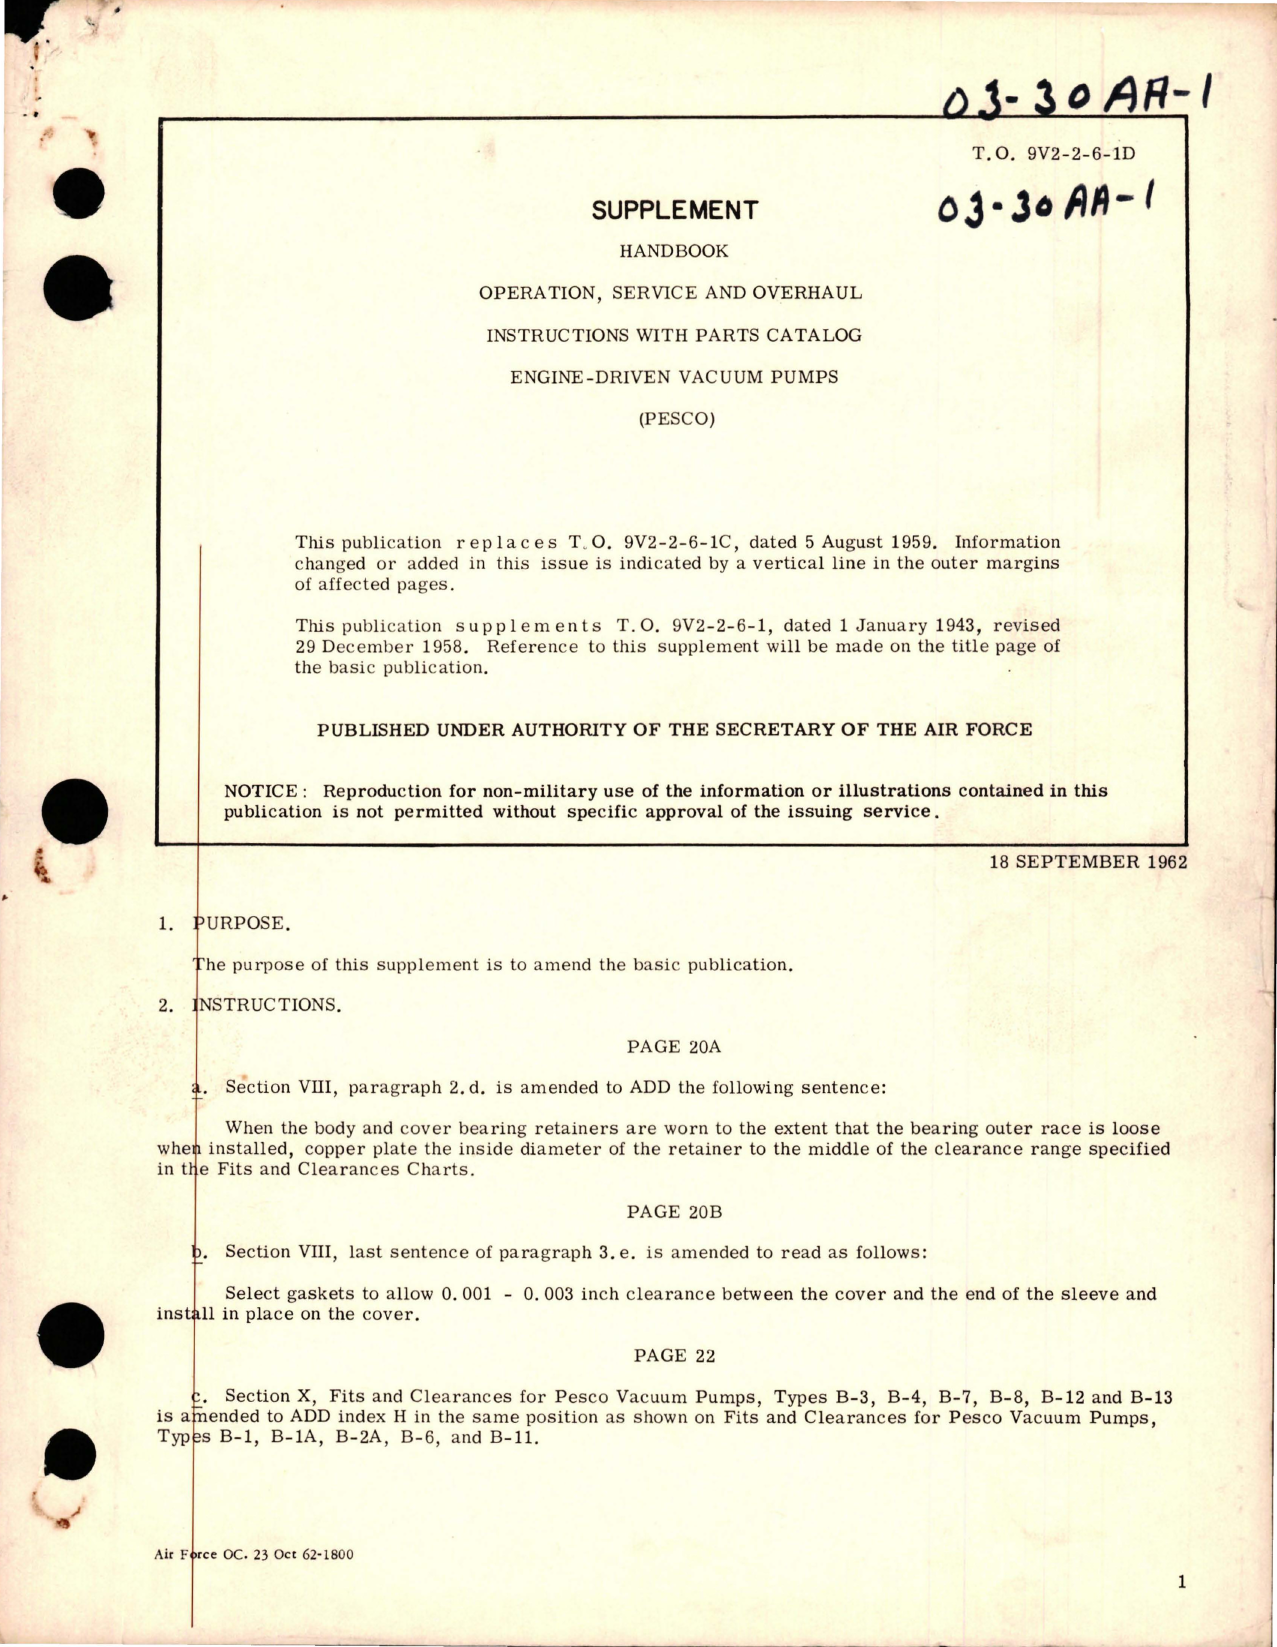 Sample page 1 from AirCorps Library document: Supplement to Operation, Service and Overhaul Instructions with Parts for Engine Driven Vacuum Pumps